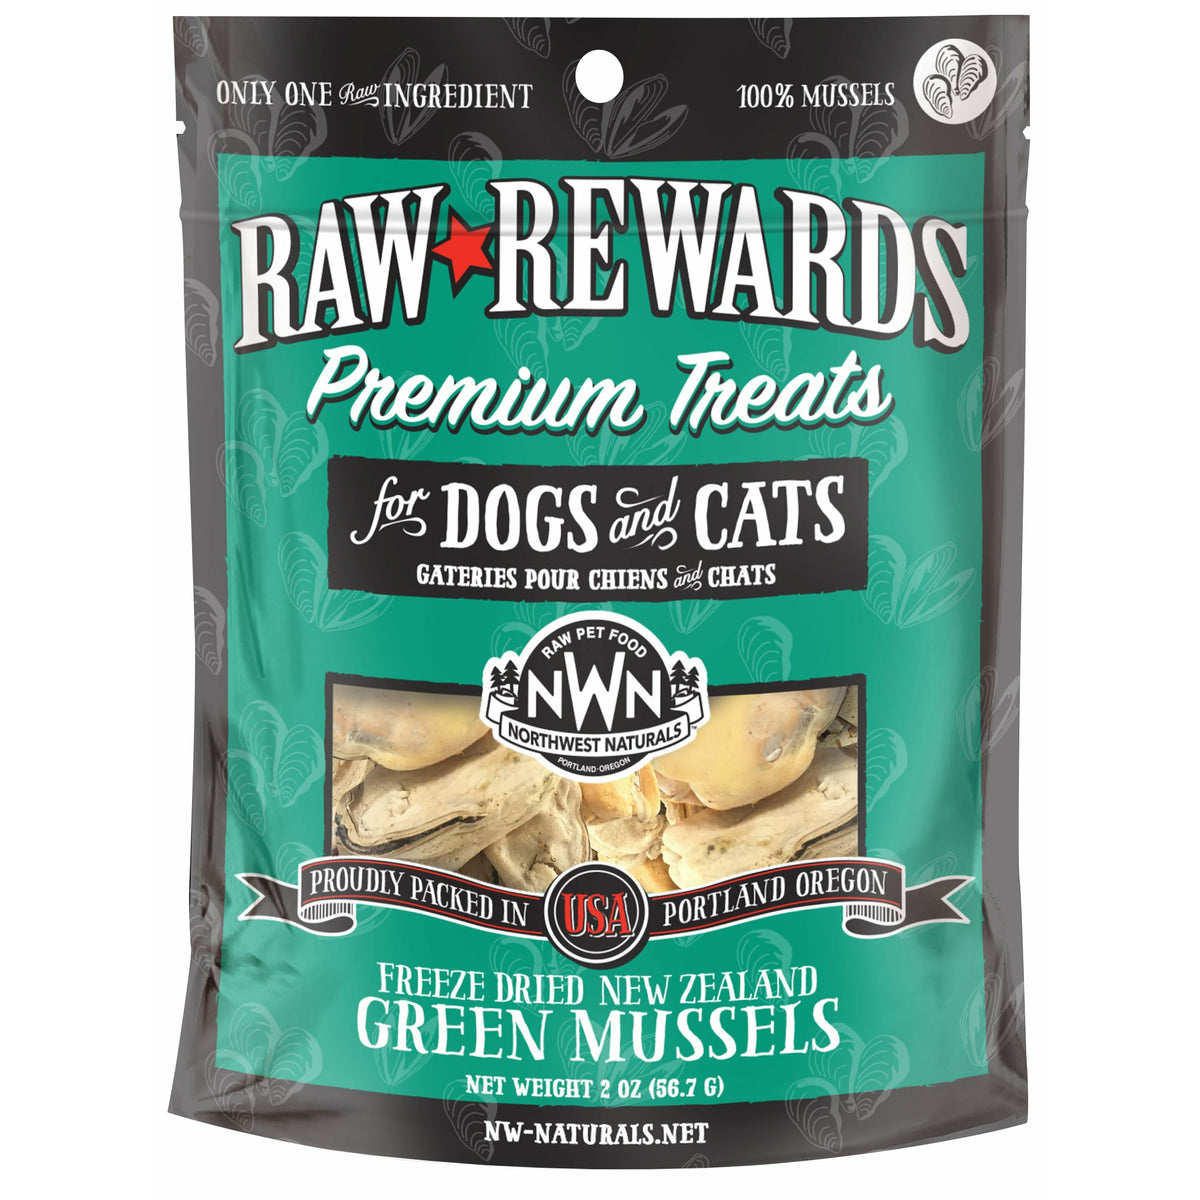 Northwest Naturals - Freeze Dried Treats - Treats for Dog and Cats